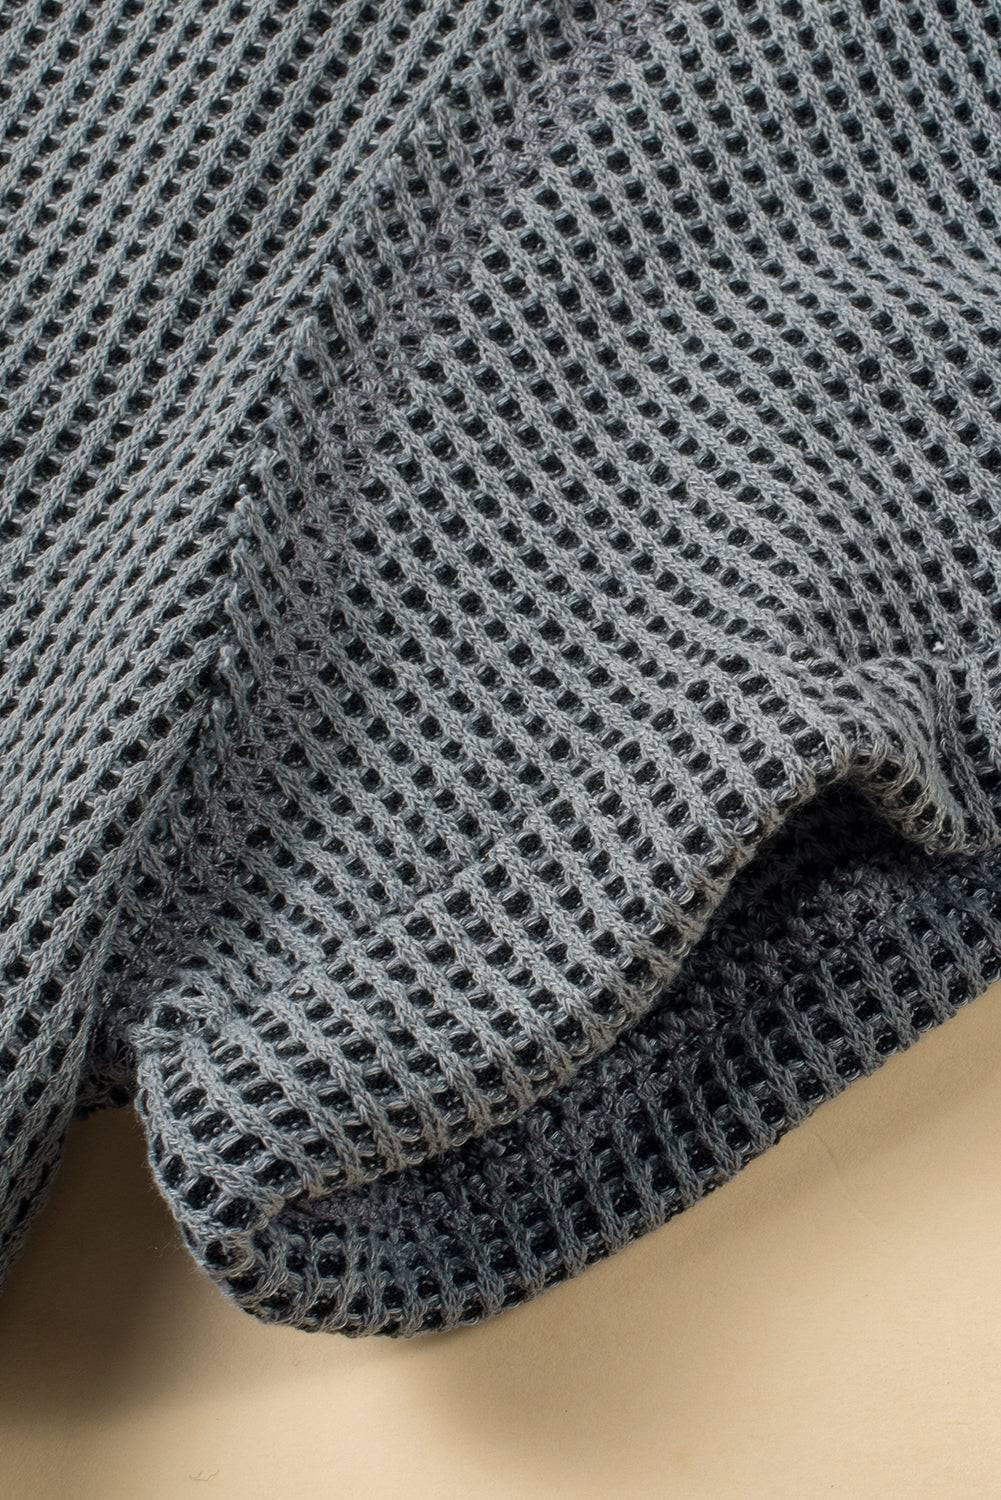 a close up of a sweater on a table